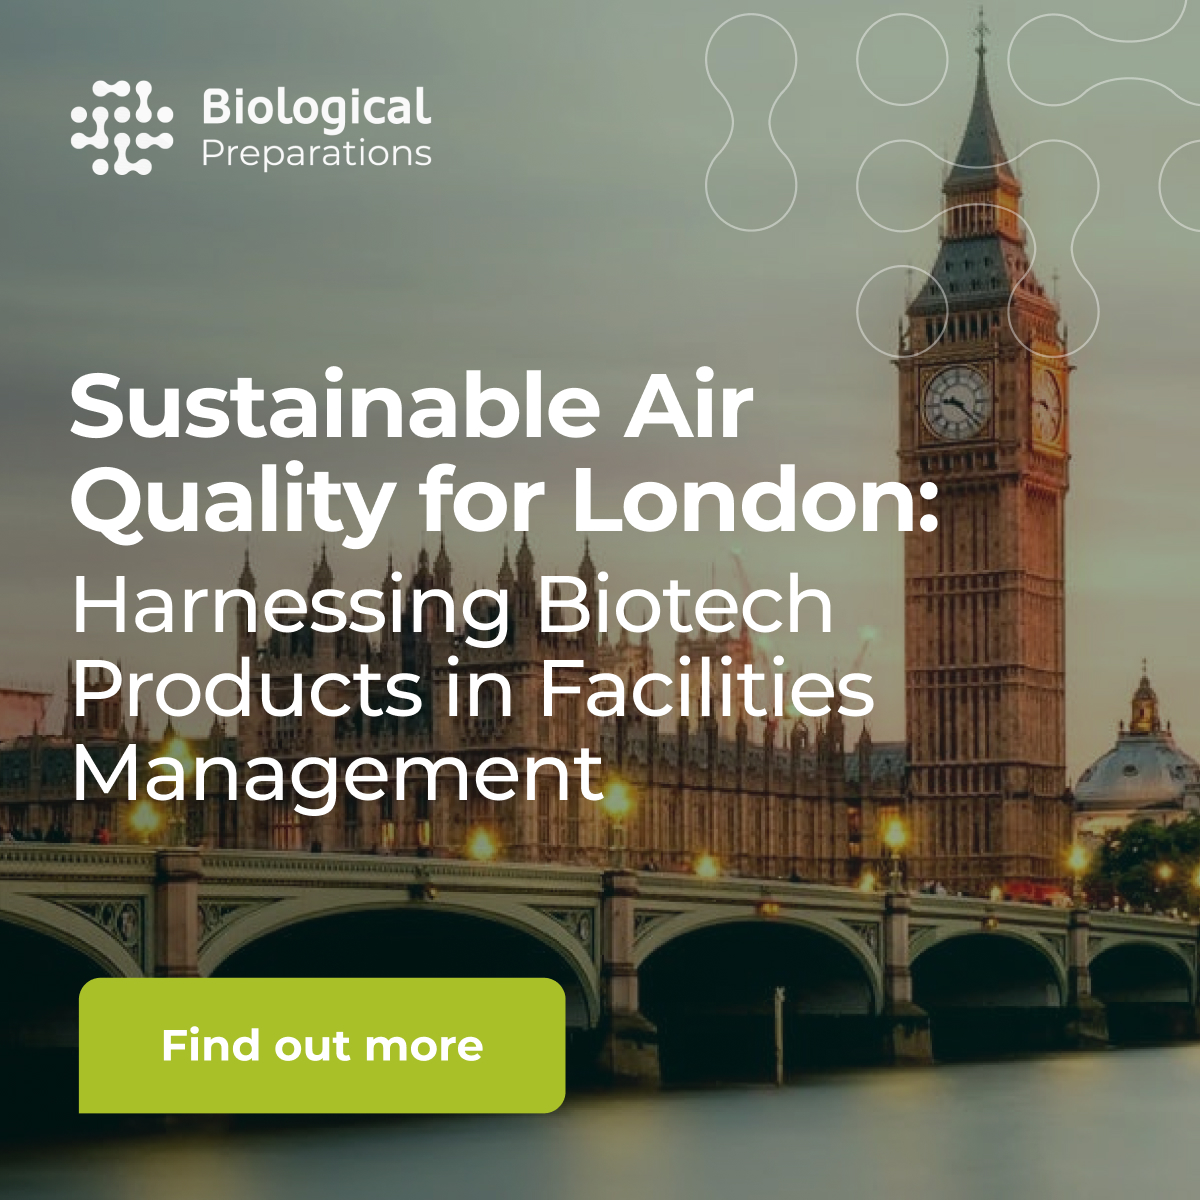 Sustainable Air Quality for London: Harnessing Biotech Products in Facilities Management